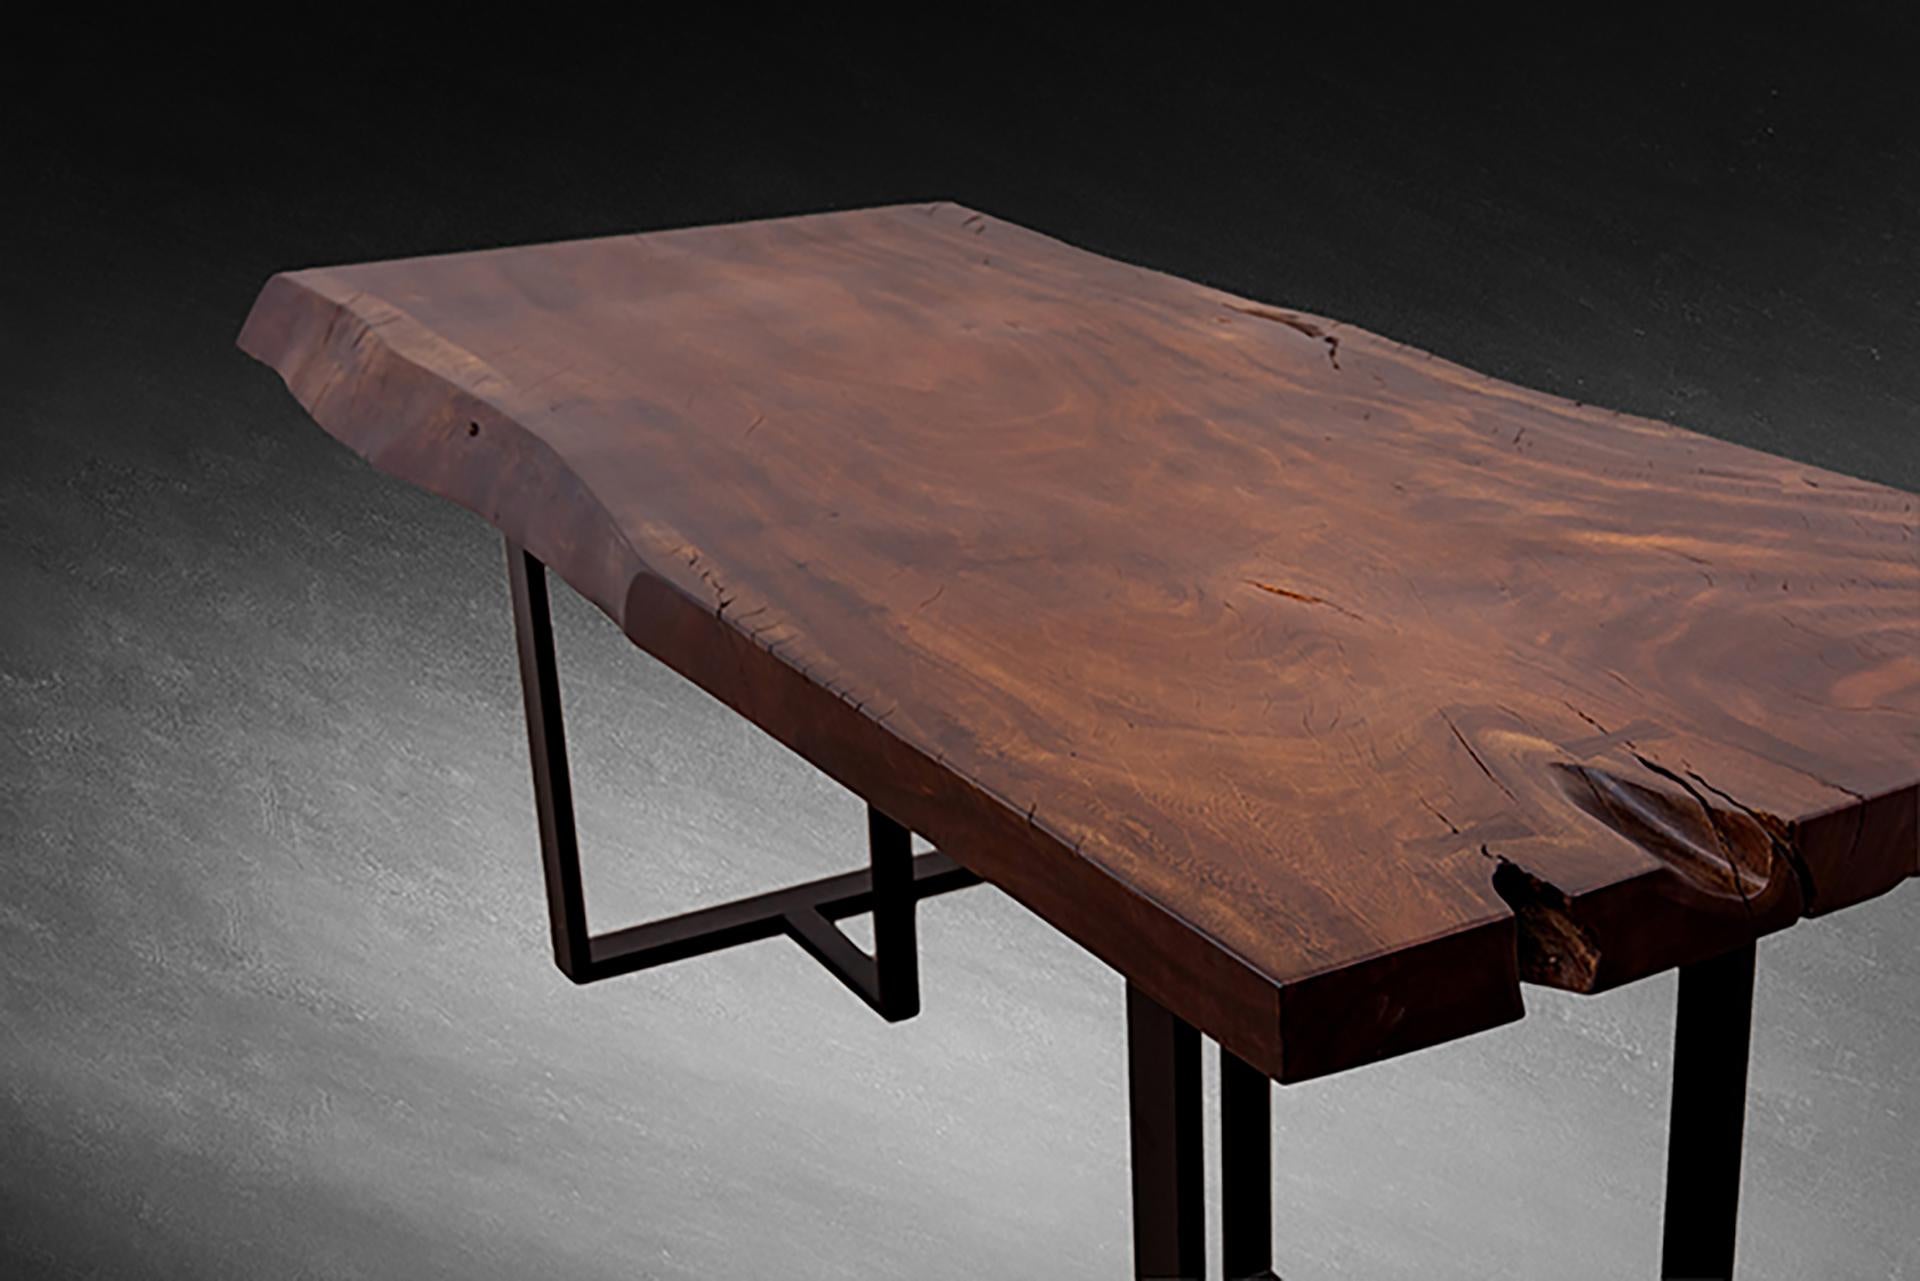 Hand-Crafted Acacia Live Edge Limited Edition Slab Table in Smooth Dark Chocolate